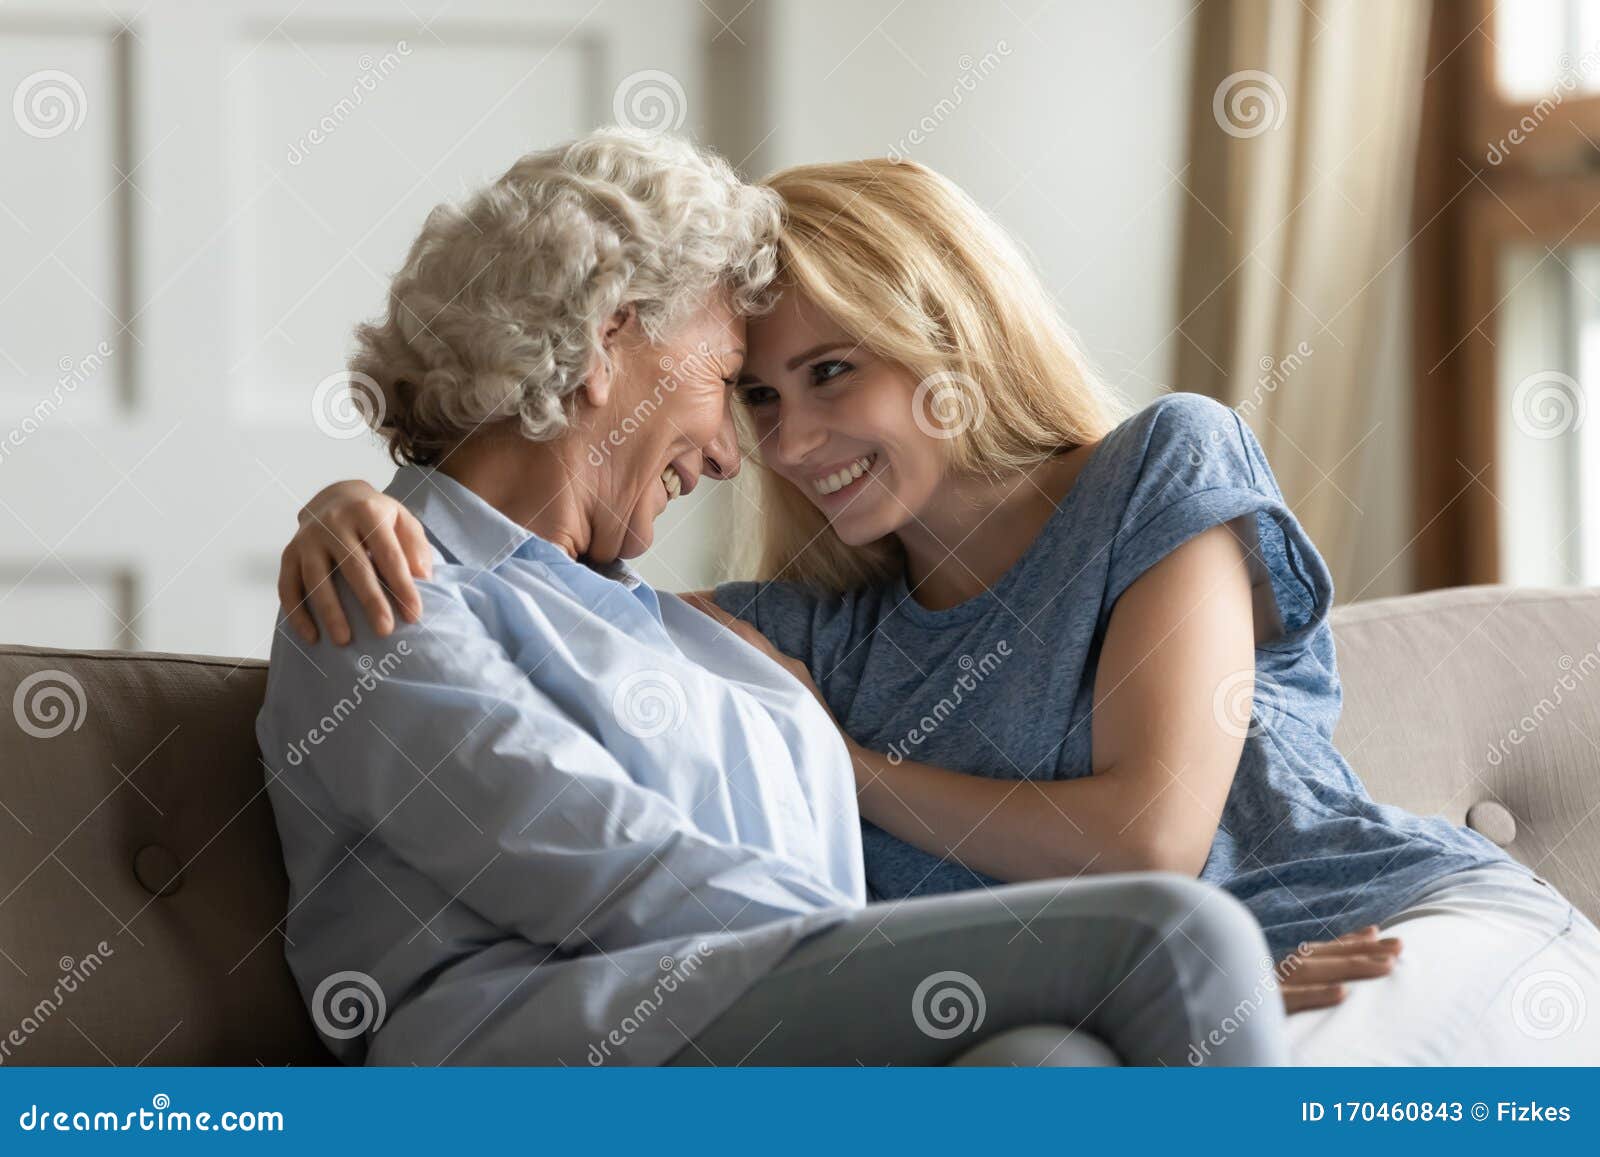 Loving older woman come 53371